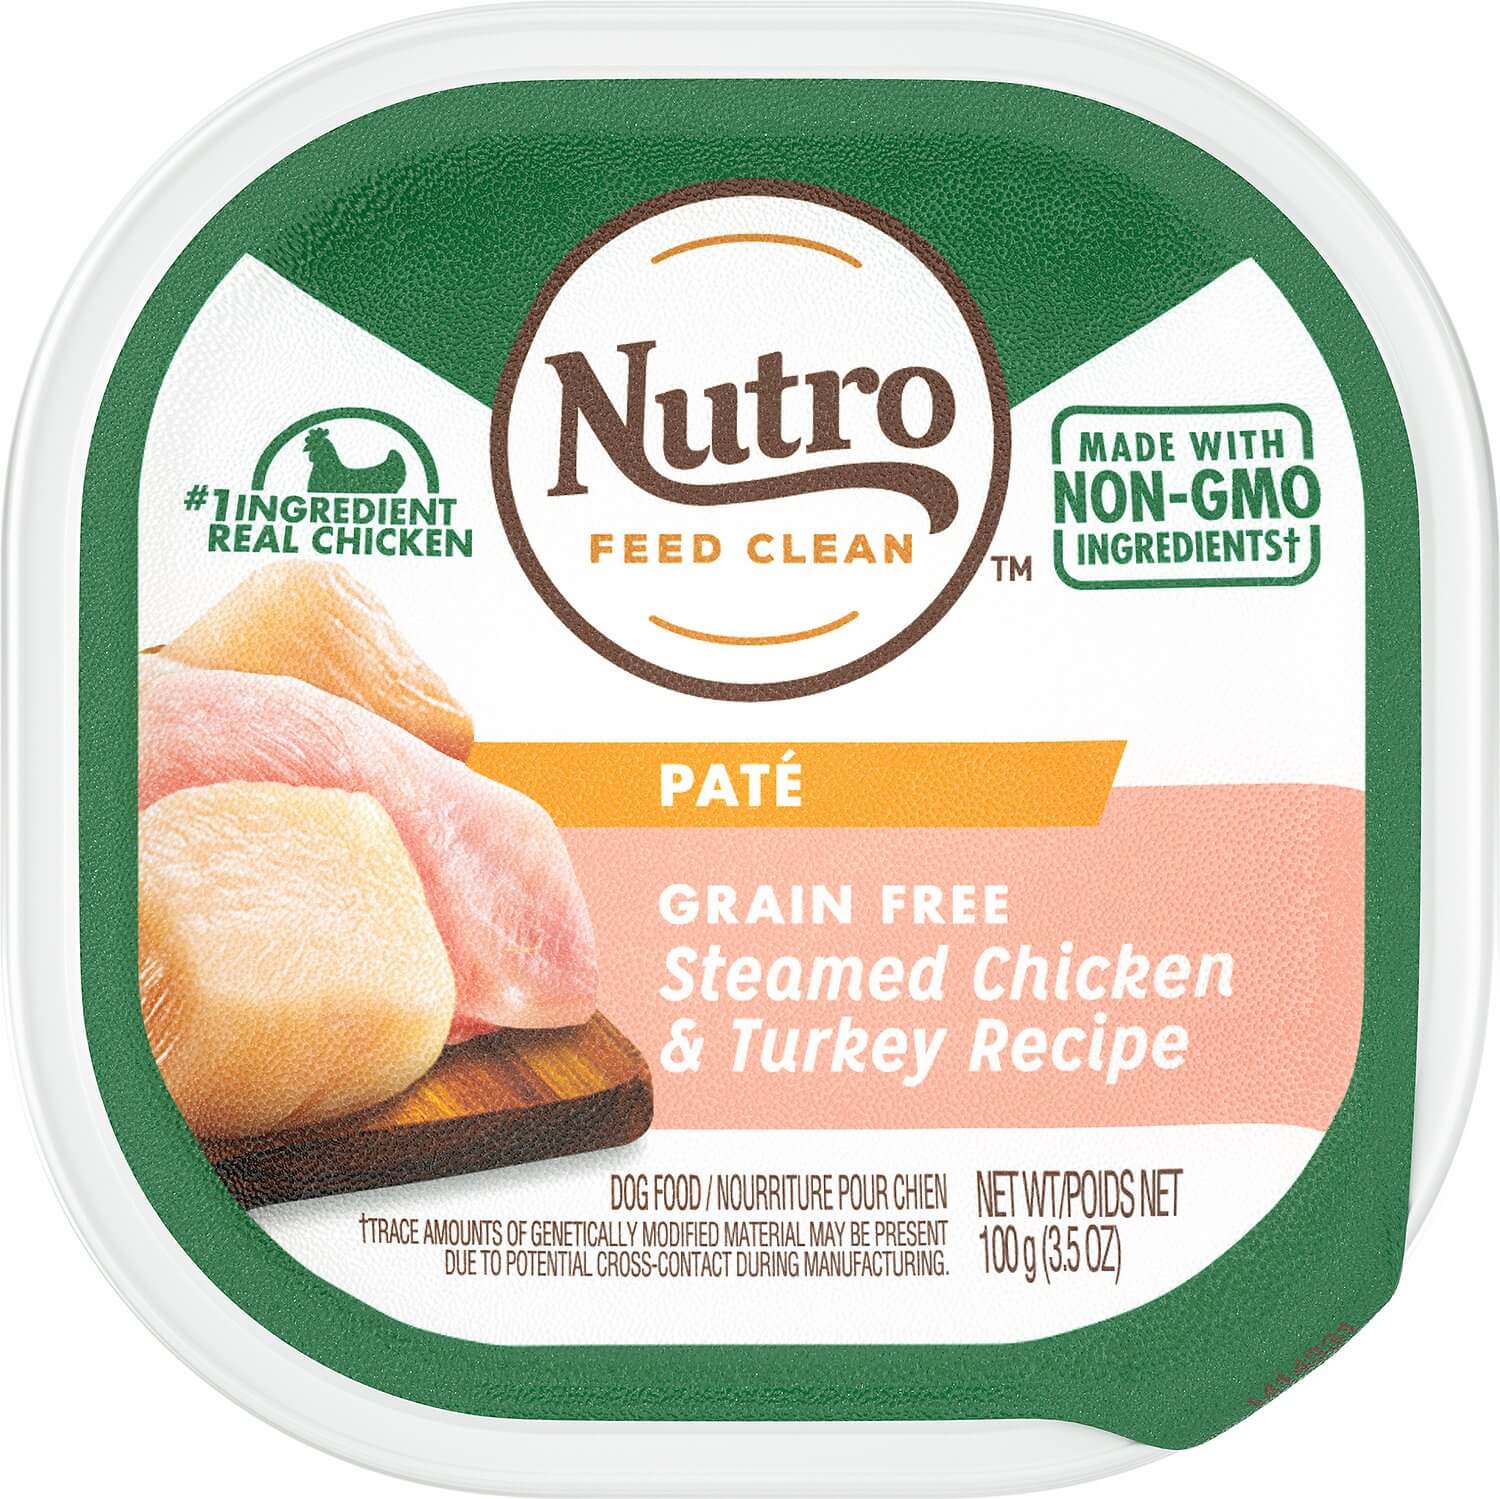 Nutro Pate Dog Food Review | Rating 